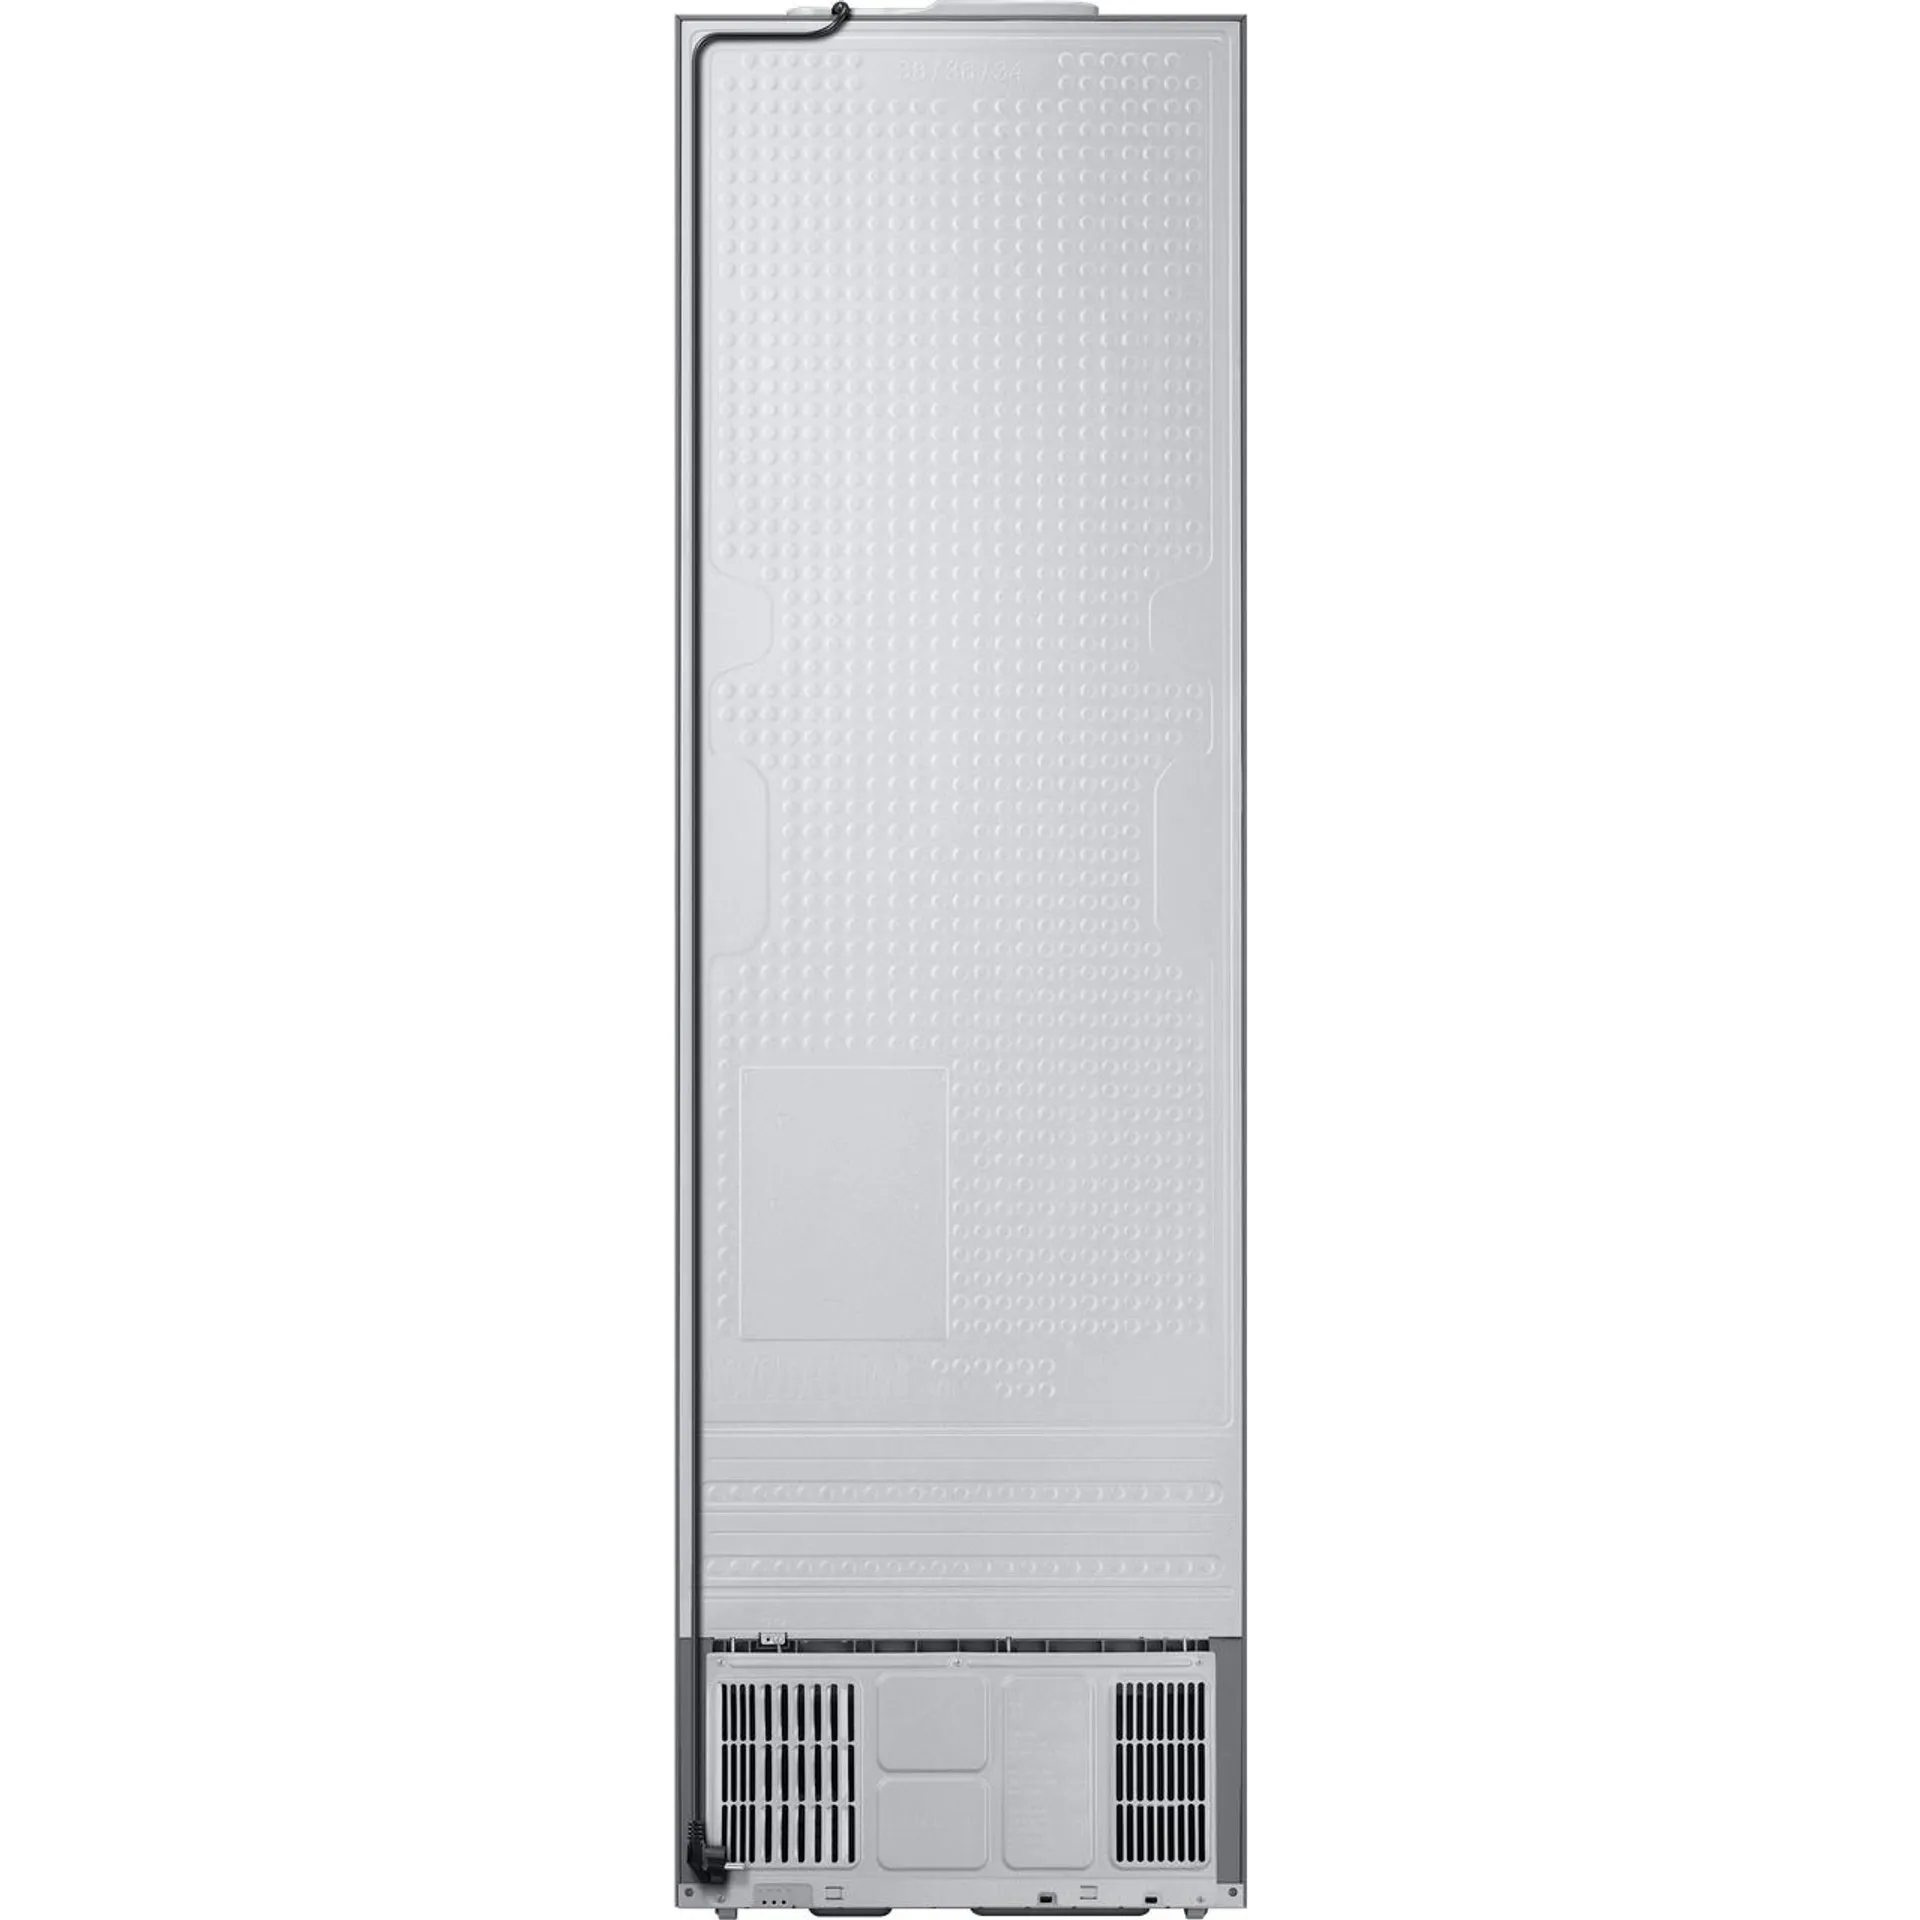 Samsung Bespoke RL38A776ASR 70/30 Frost Free Fridge Freezer - Stainless Steel - A Rated